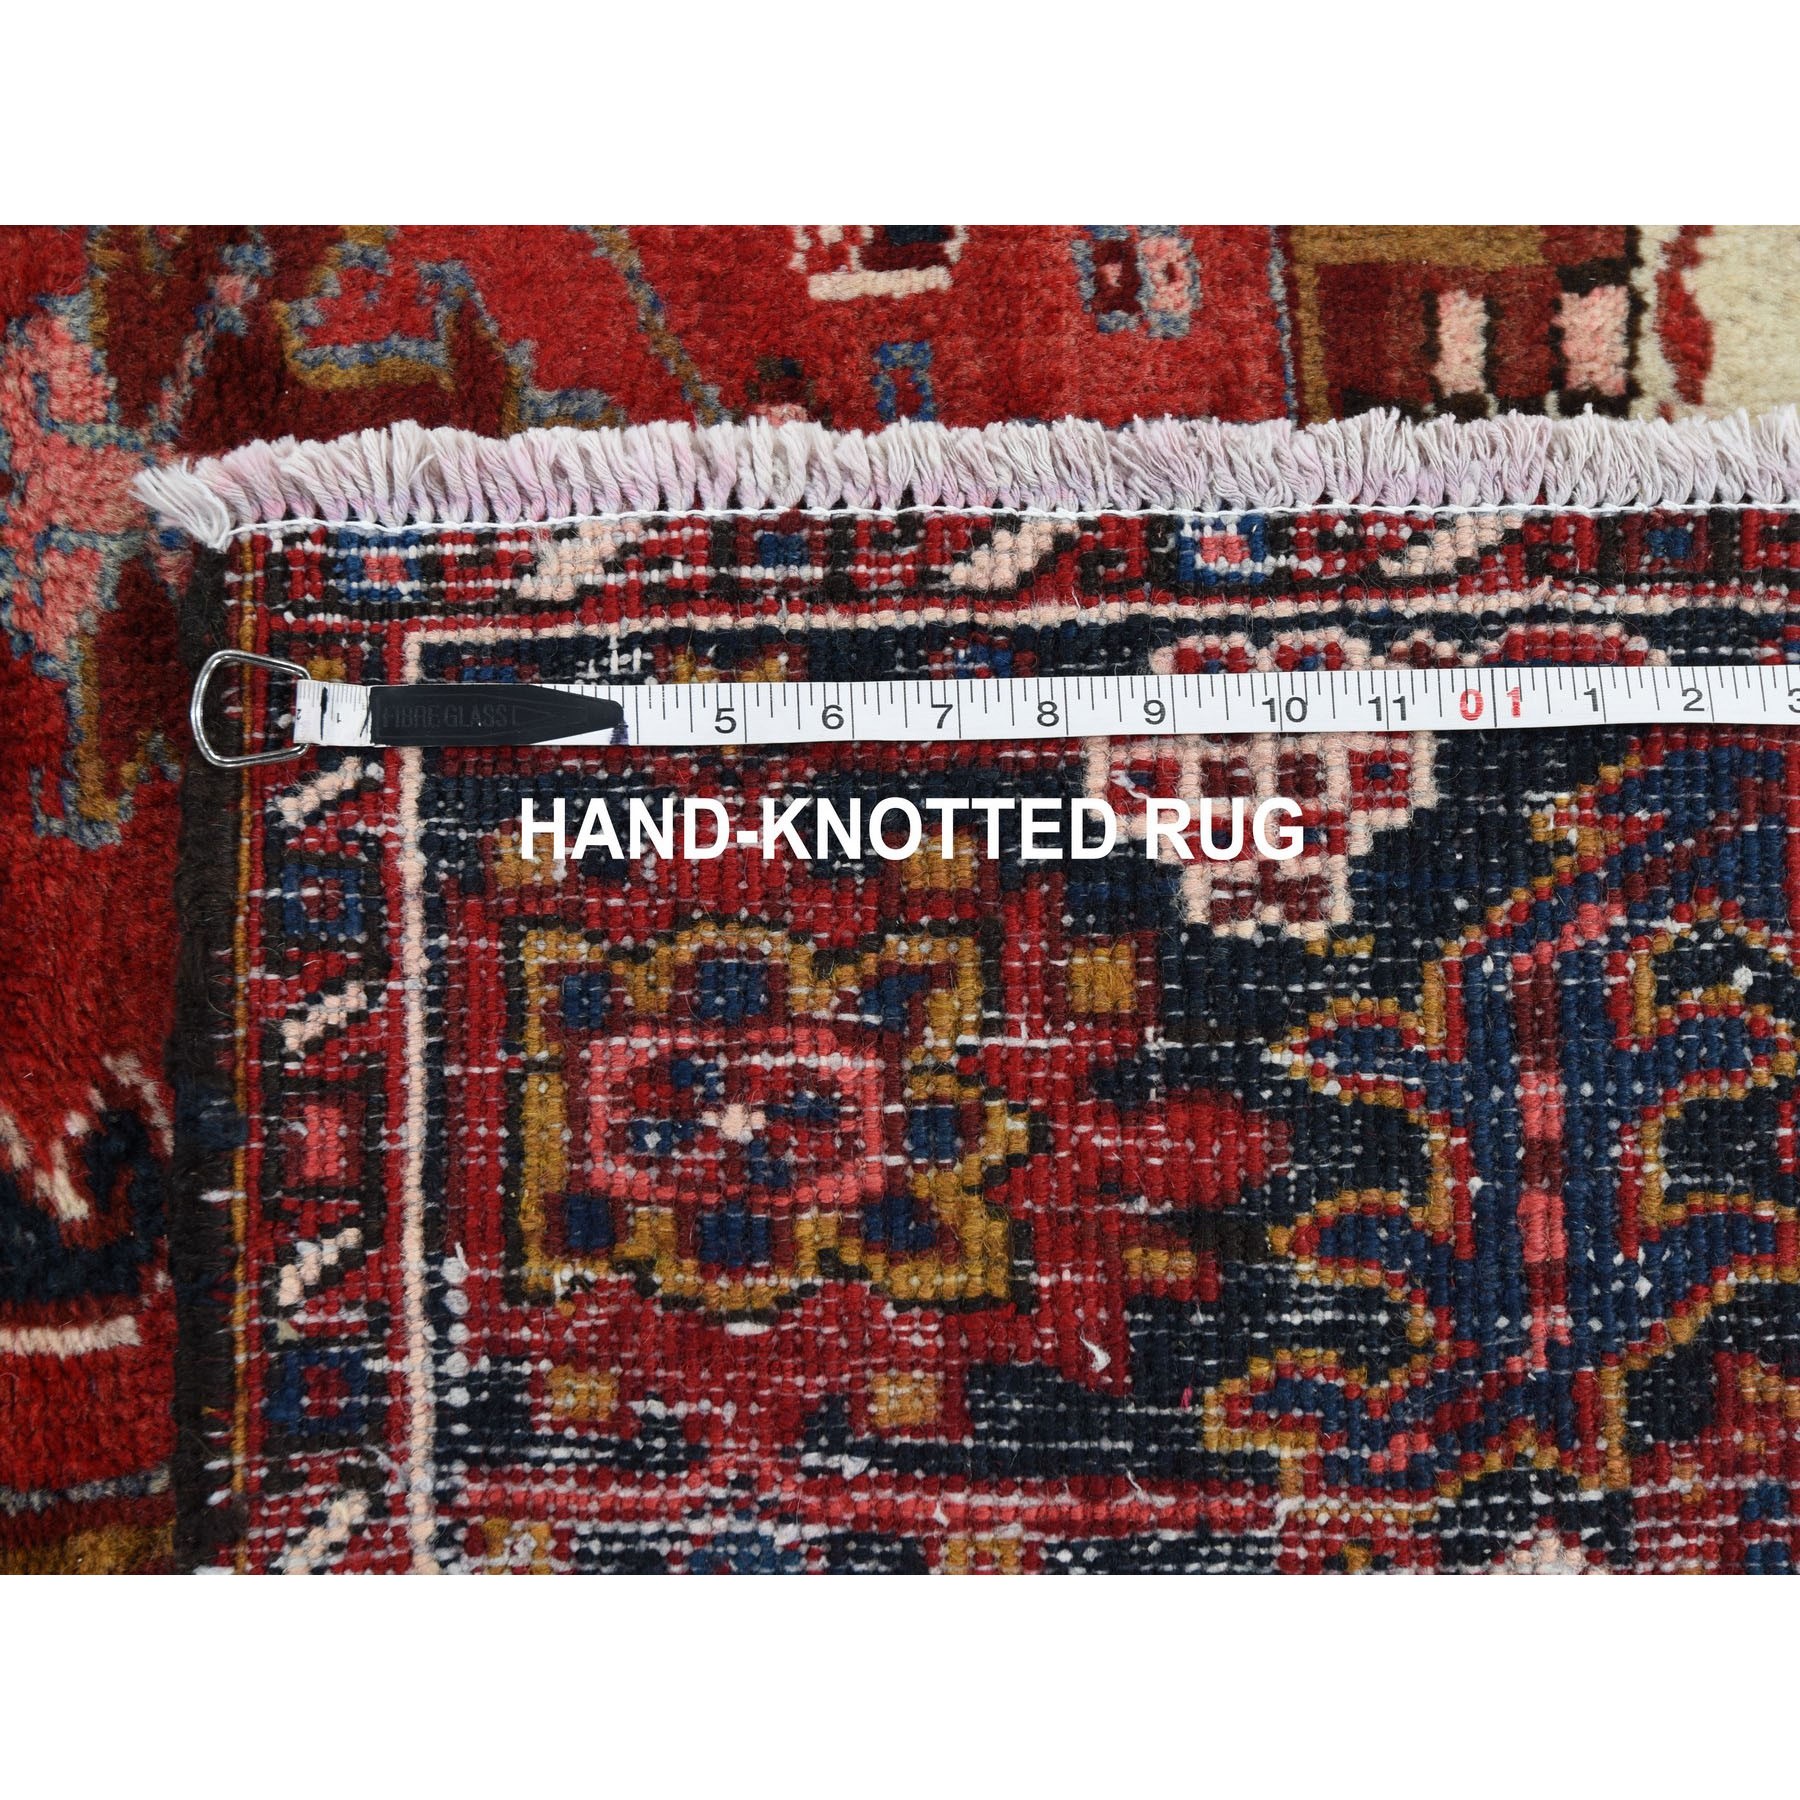 8-x10- Red Semi Antique Persian Heriz Geometric Design Thick and Plush Hand Knotted Oriental Rug 